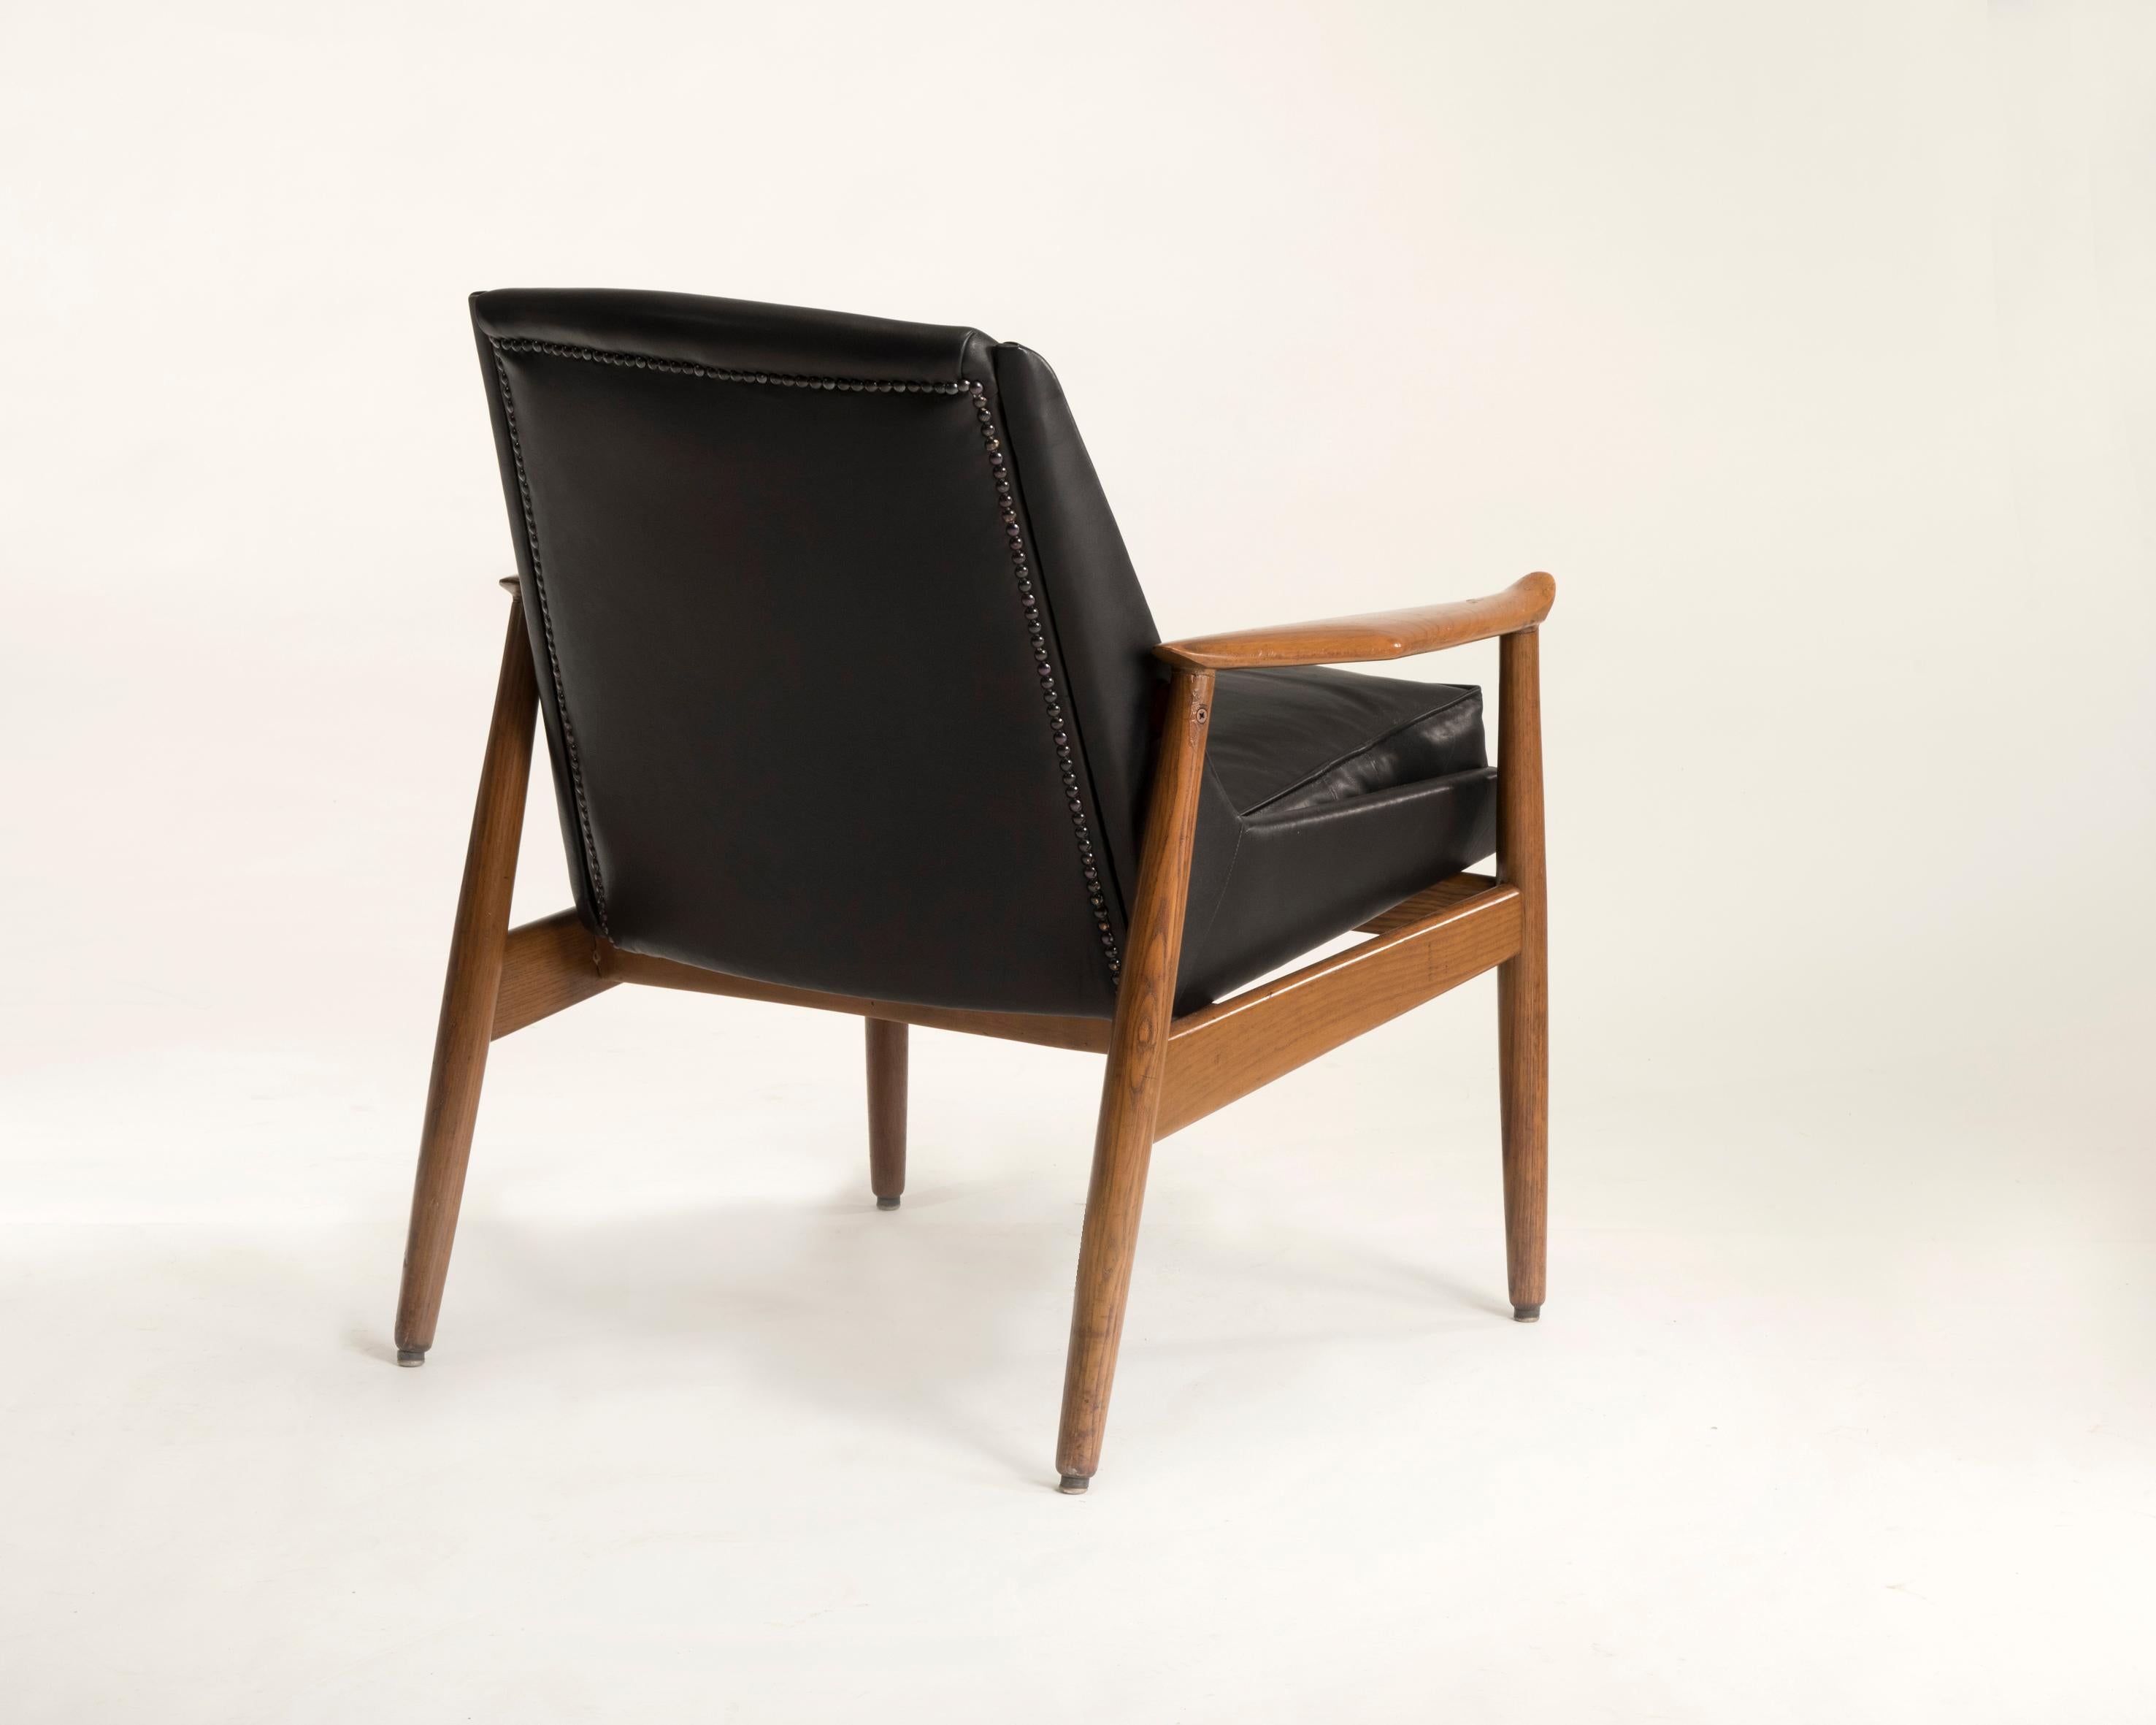 Walnut wood armchair by Pizzetti - Italian designer from Rome during 1950s- Black leather from 1950s.
We have restored it in a conservative way the wooden parts while we have reupholstered it with premium black leather. A video is available upon